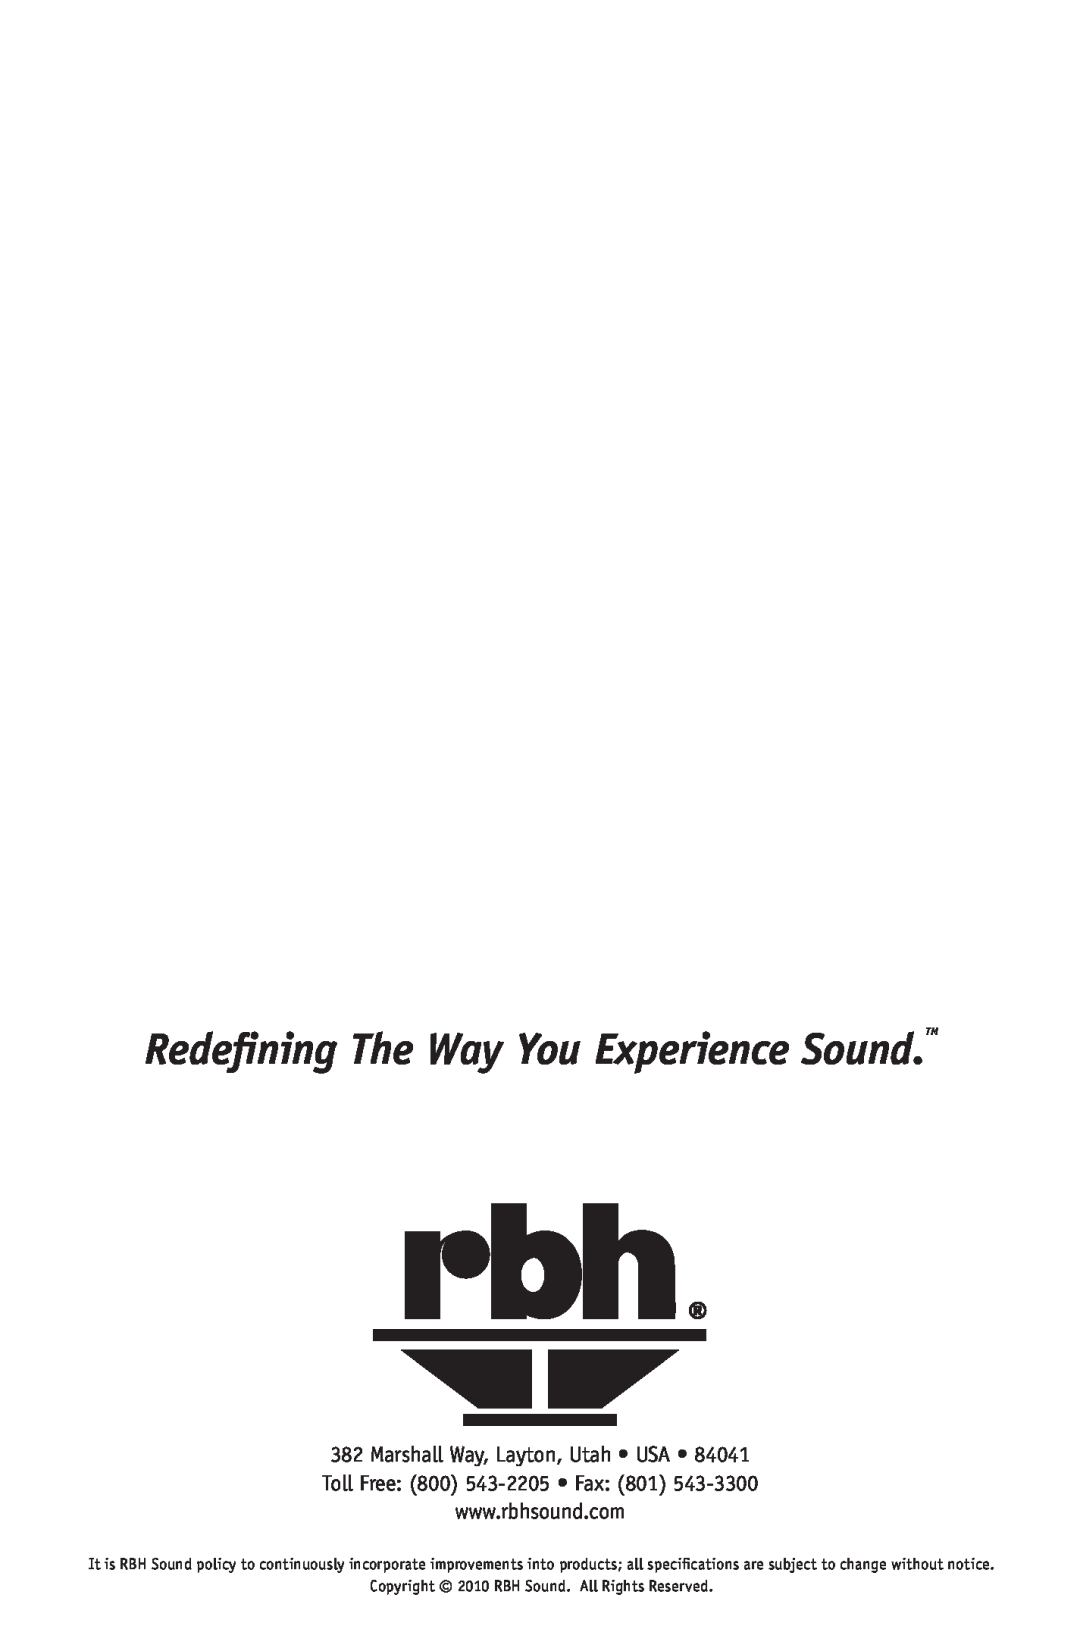 RBH Sound SI-744 owner manual Redefining The Way You Experience Sound.TM, Copyright 2010 RBH Sound. All Rights Reserved 